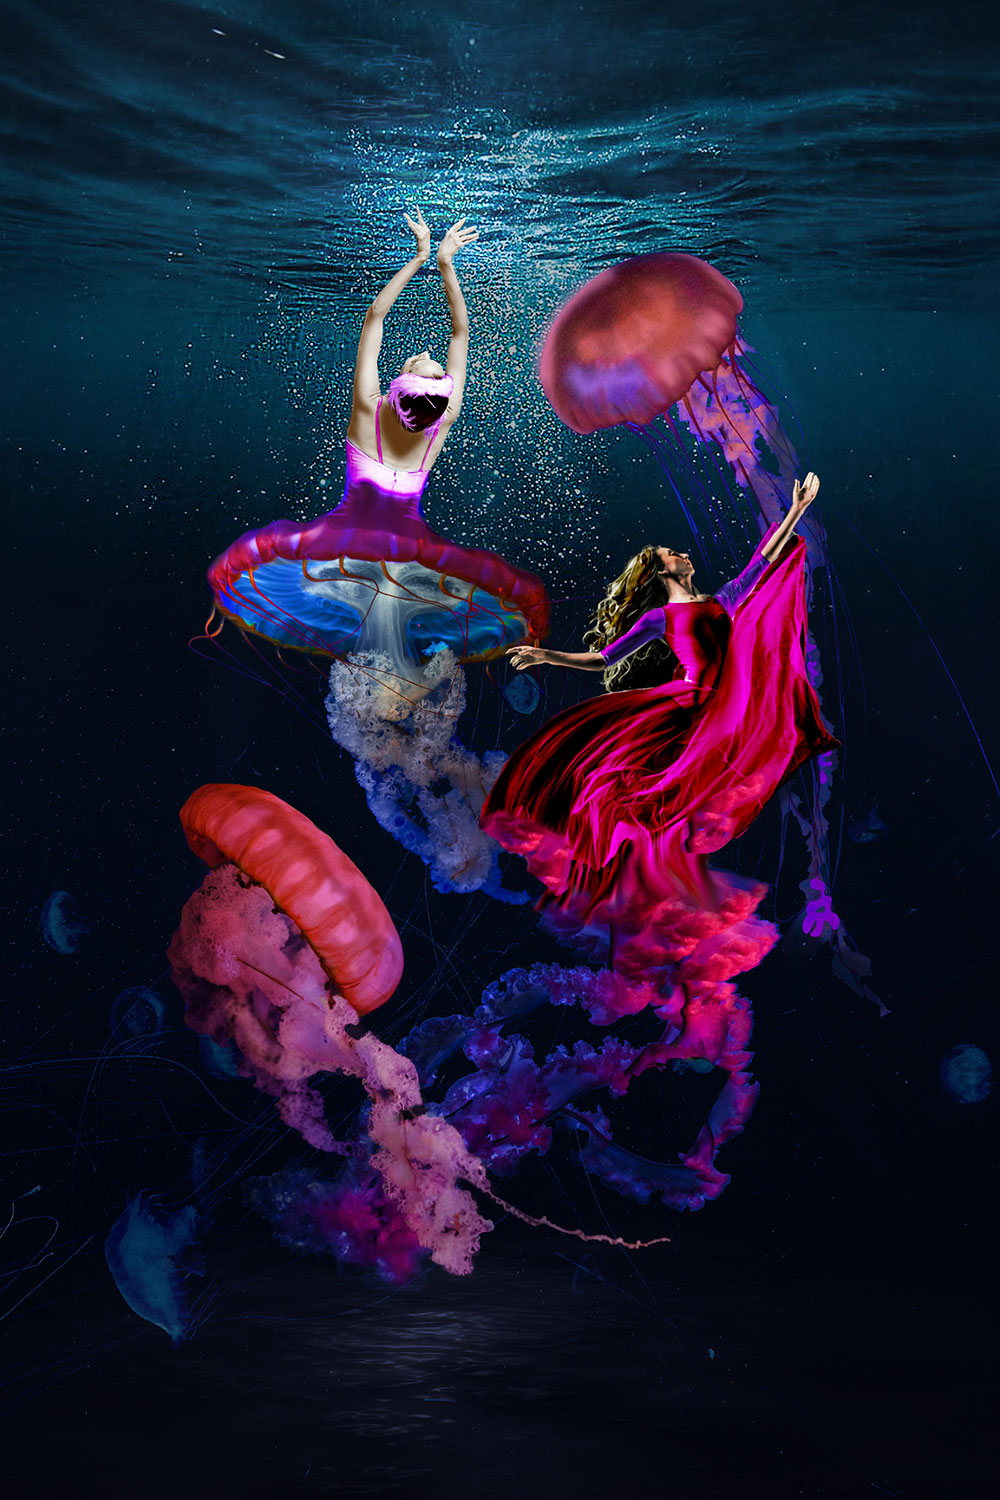 A photoshopped image composed of two underwater dancing women that are top-half ballerinas and bottom half jellyfish 